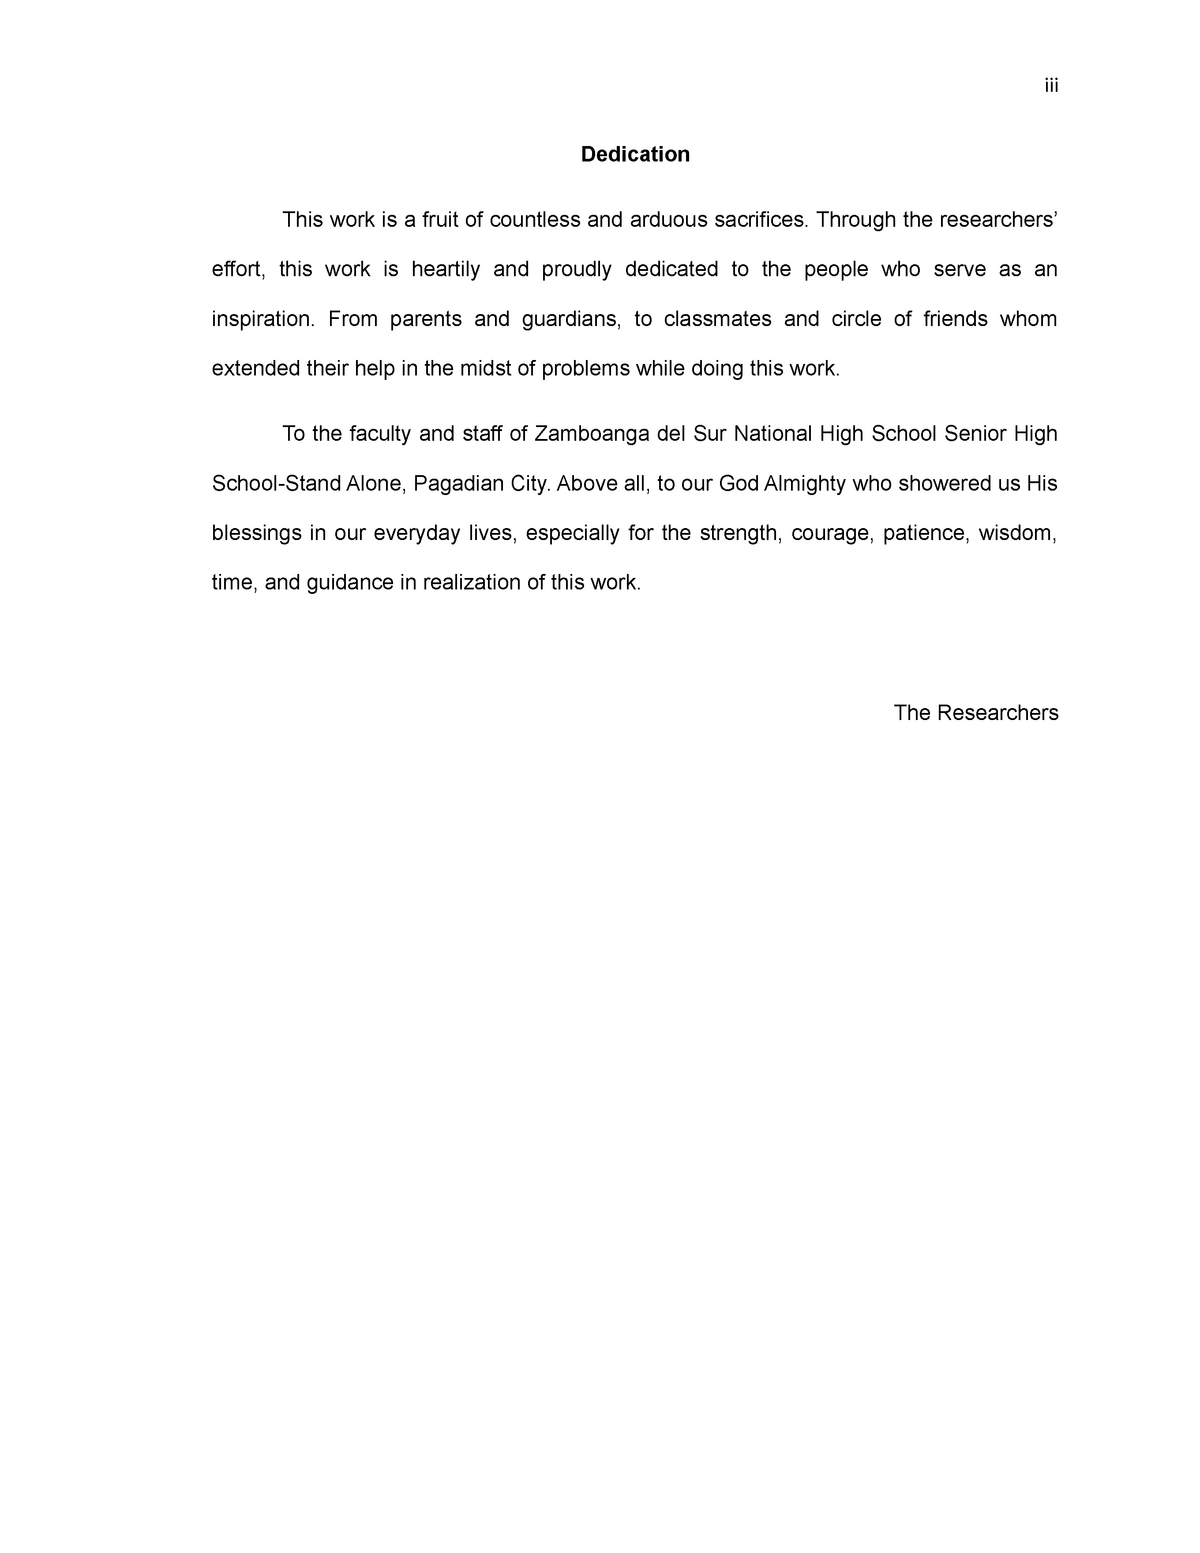 sample of thesis dedication letter